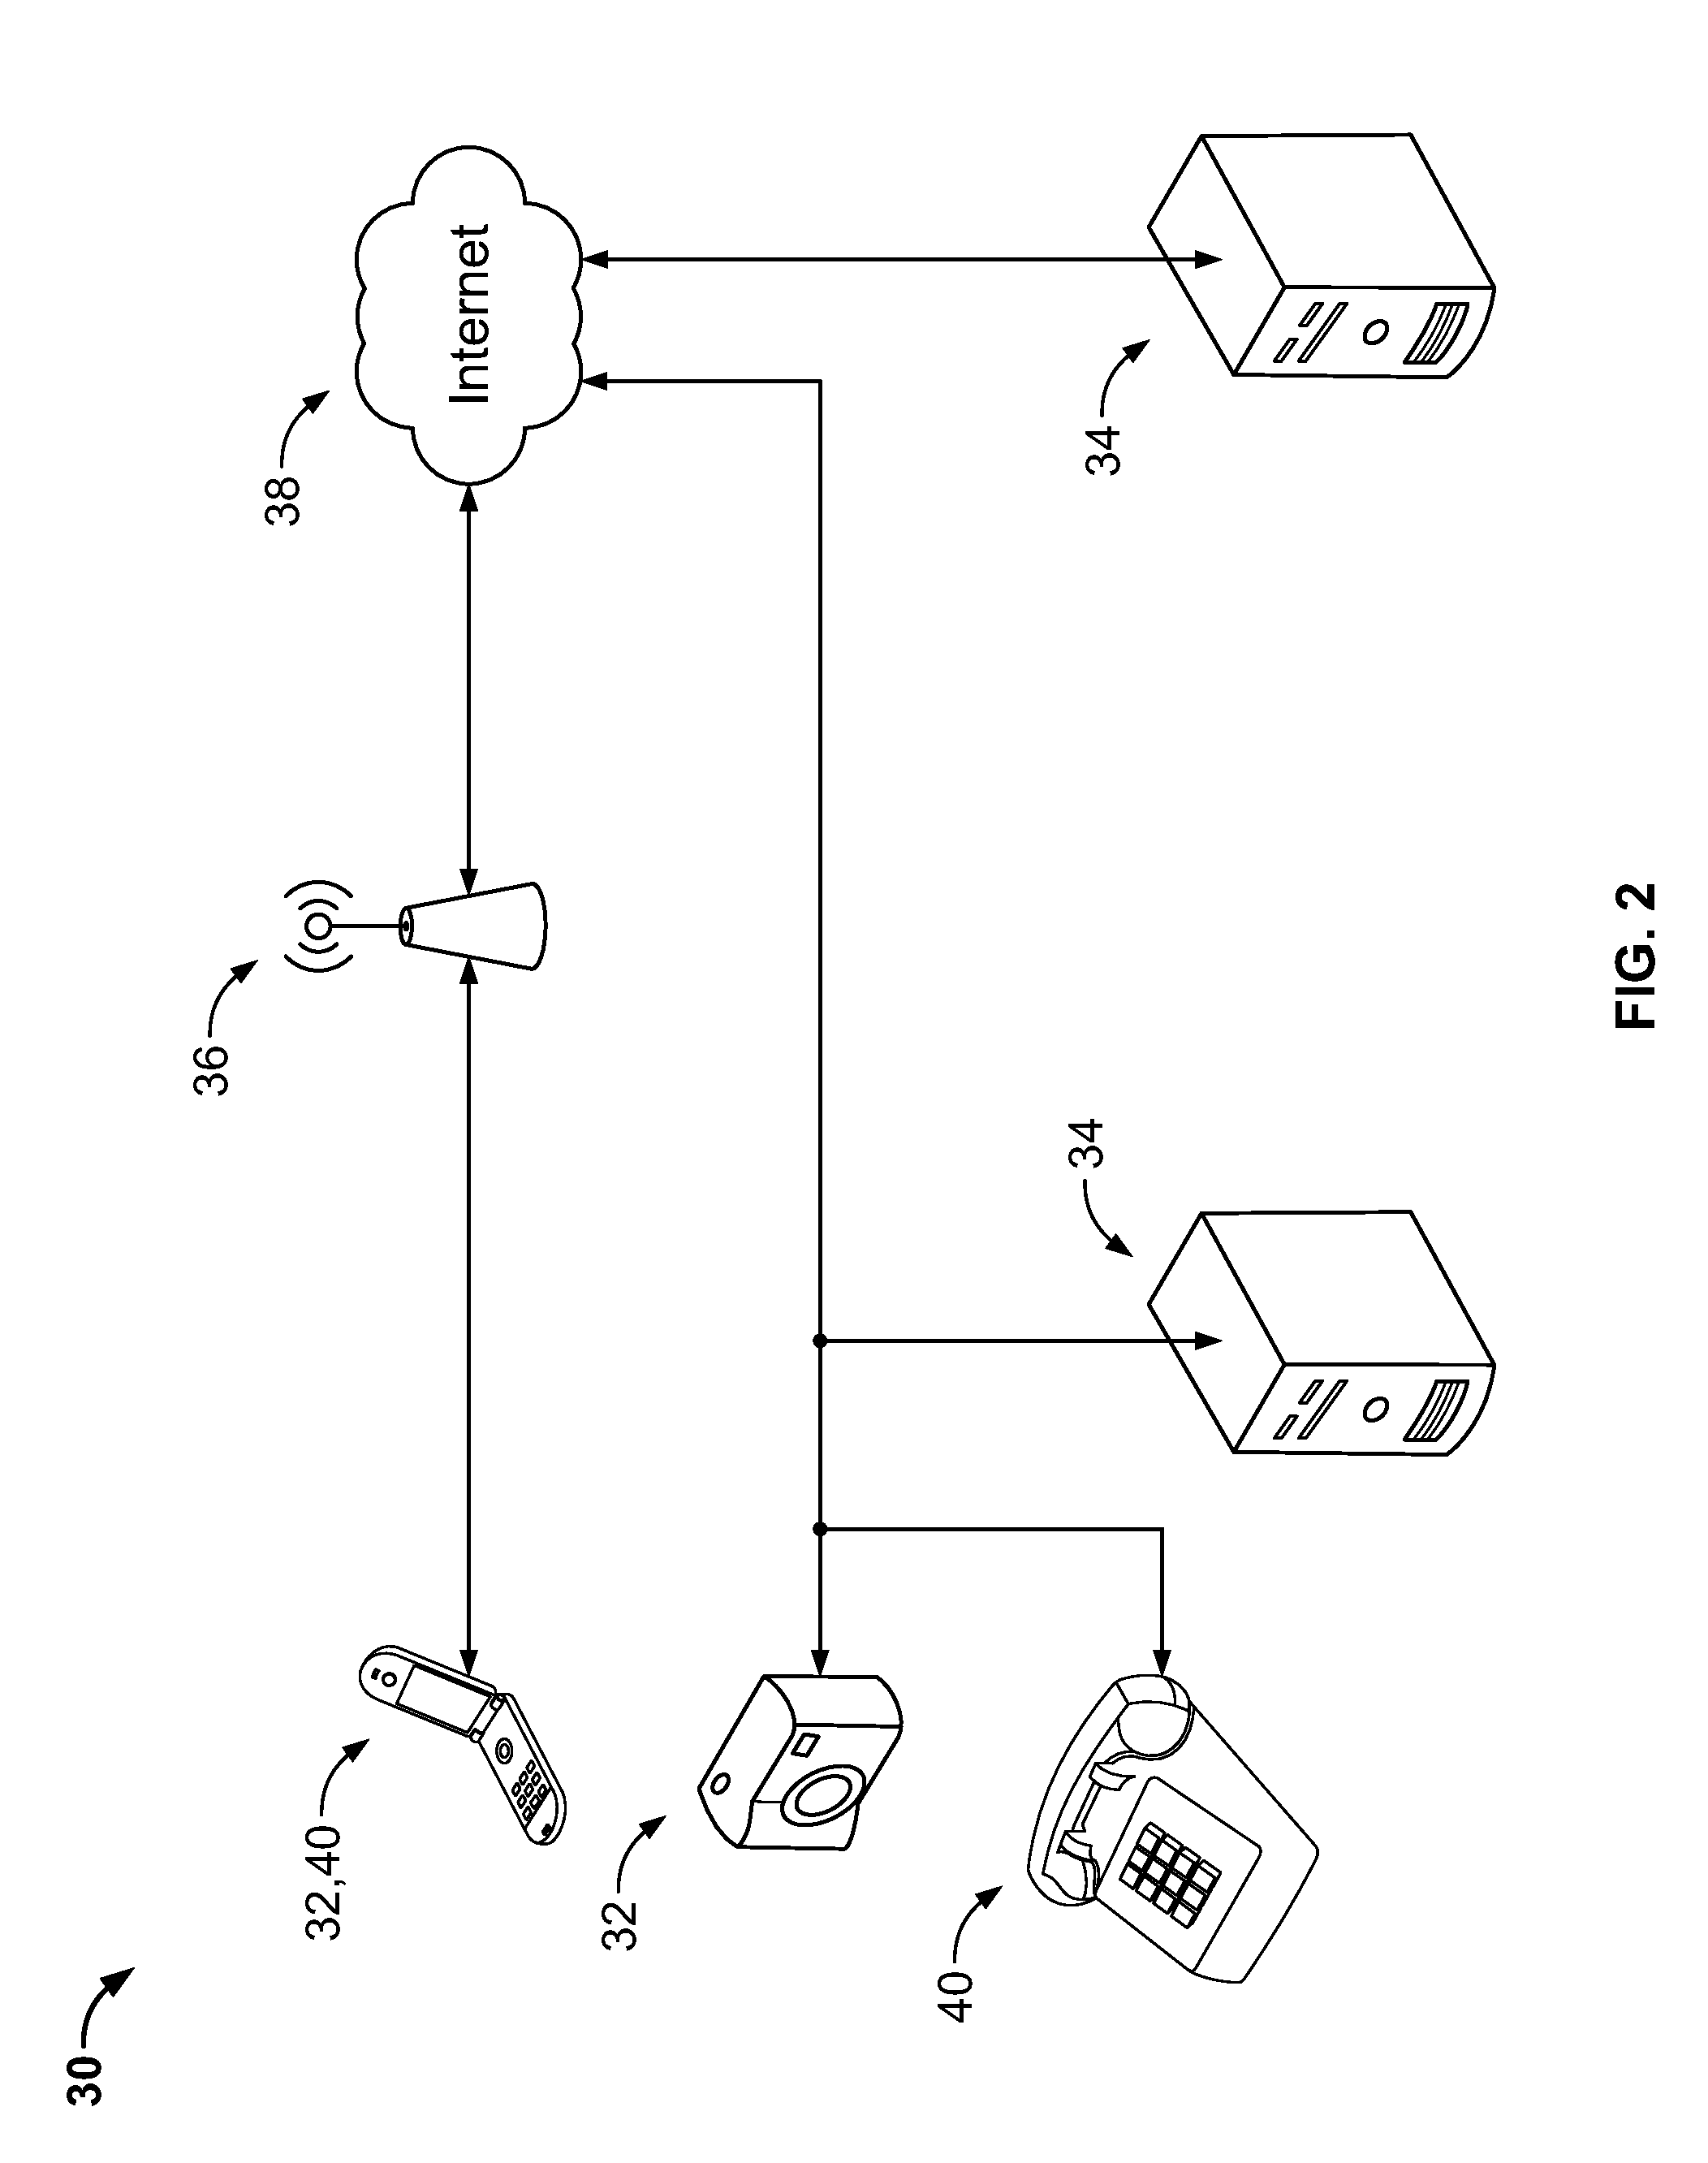 Method for computing food volume in a method for analyzing food